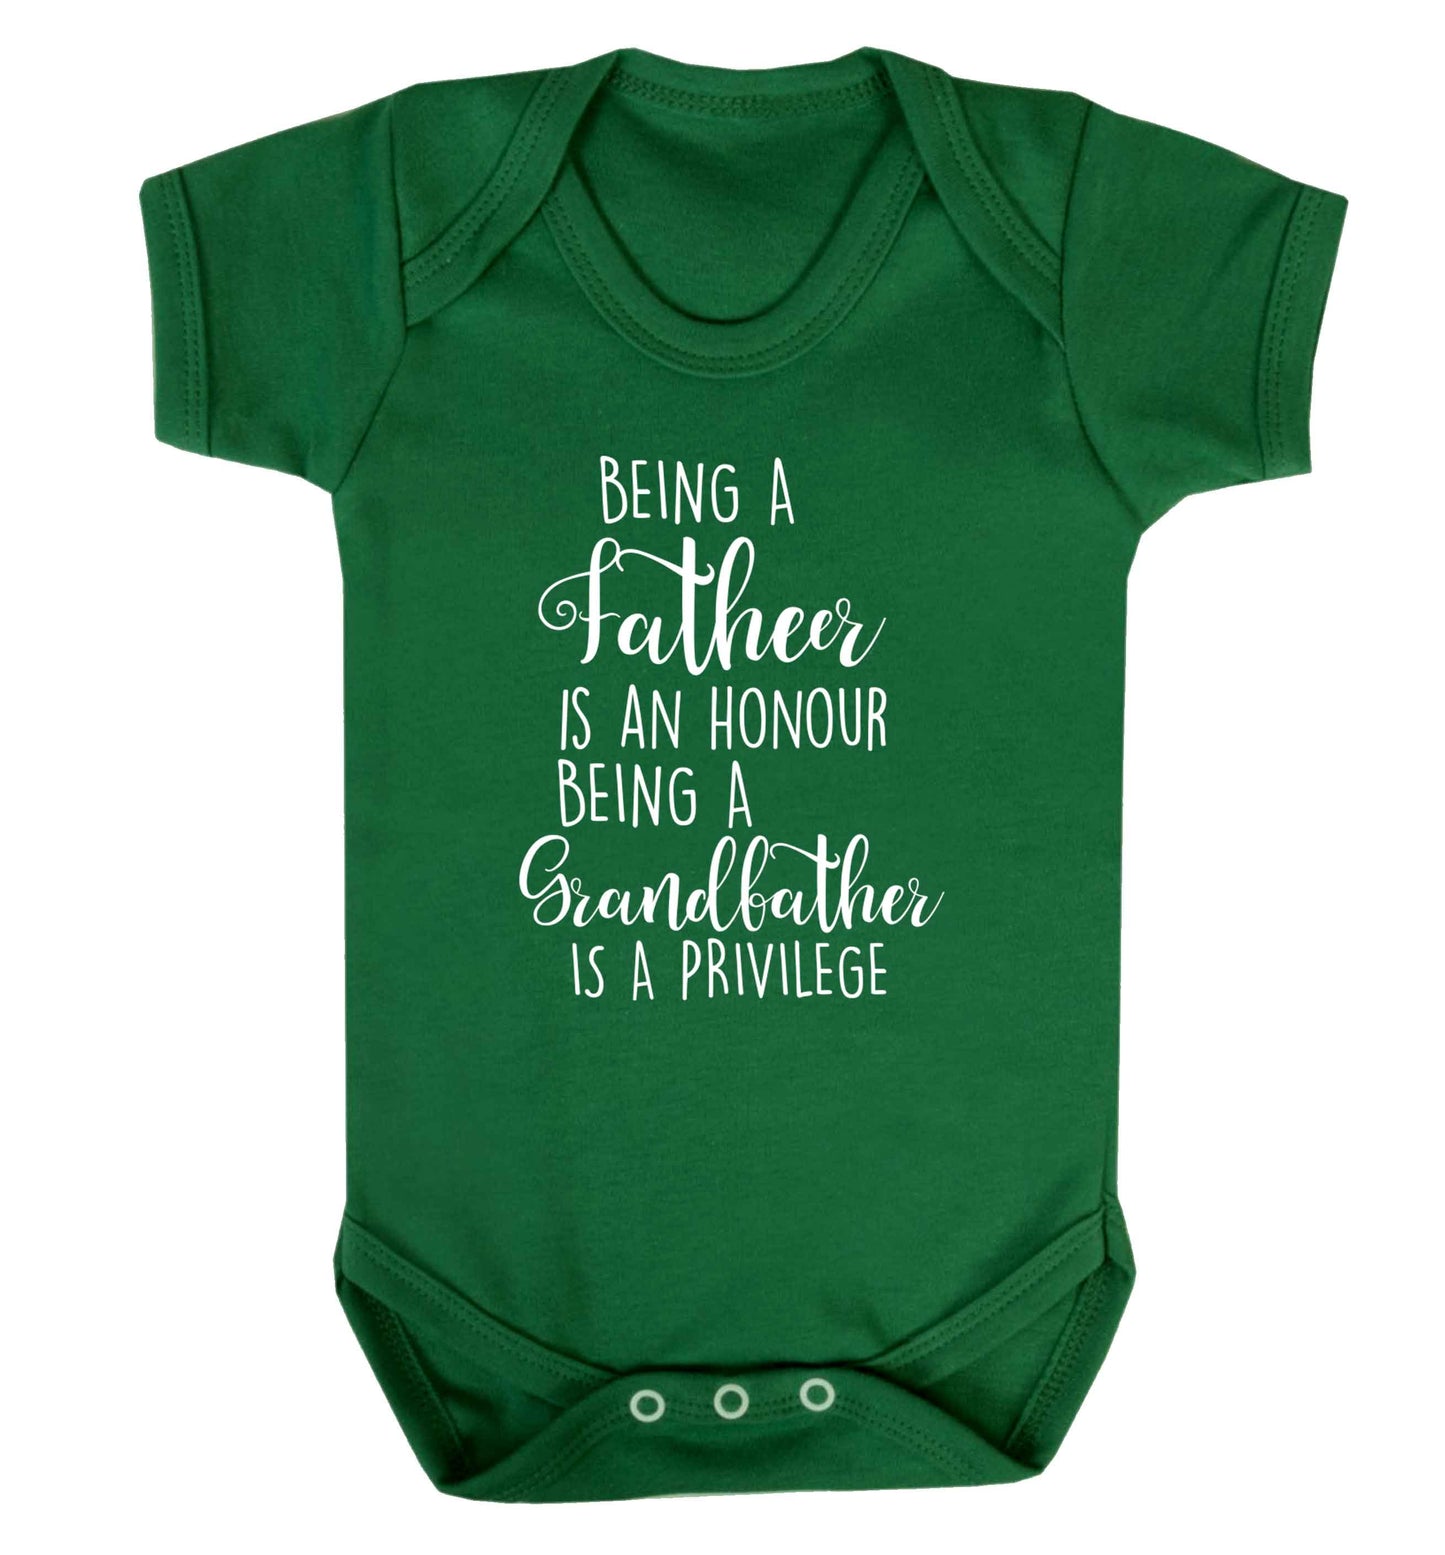 Being a father is an honour being a grandfather is a privilege Baby Vest green 18-24 months